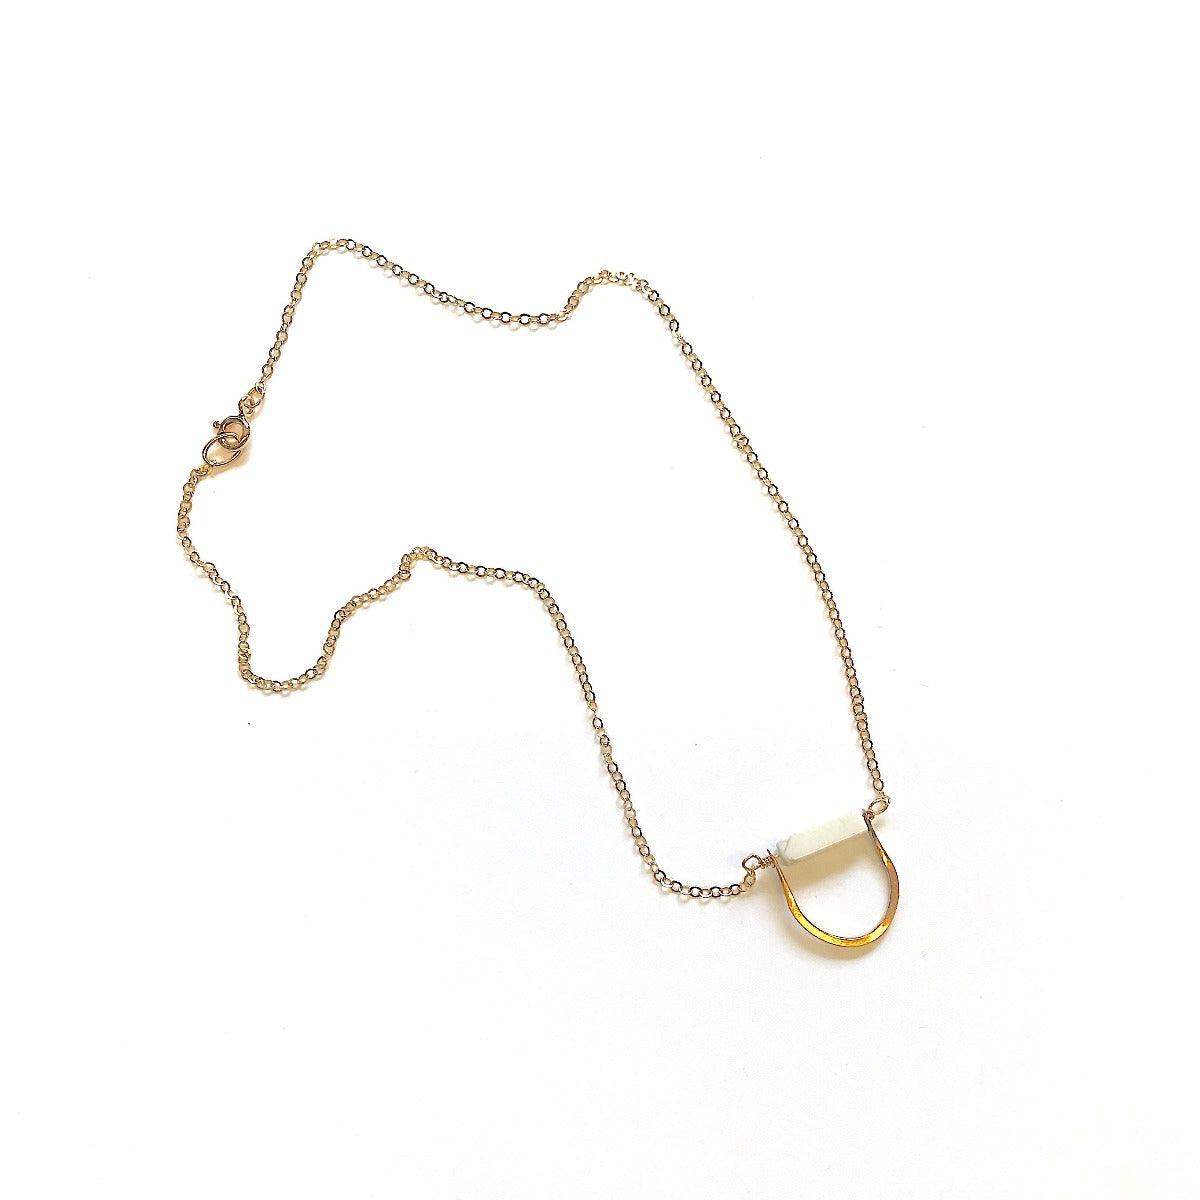 Nieve Brass and White Howlite Pendant Necklace - Forai